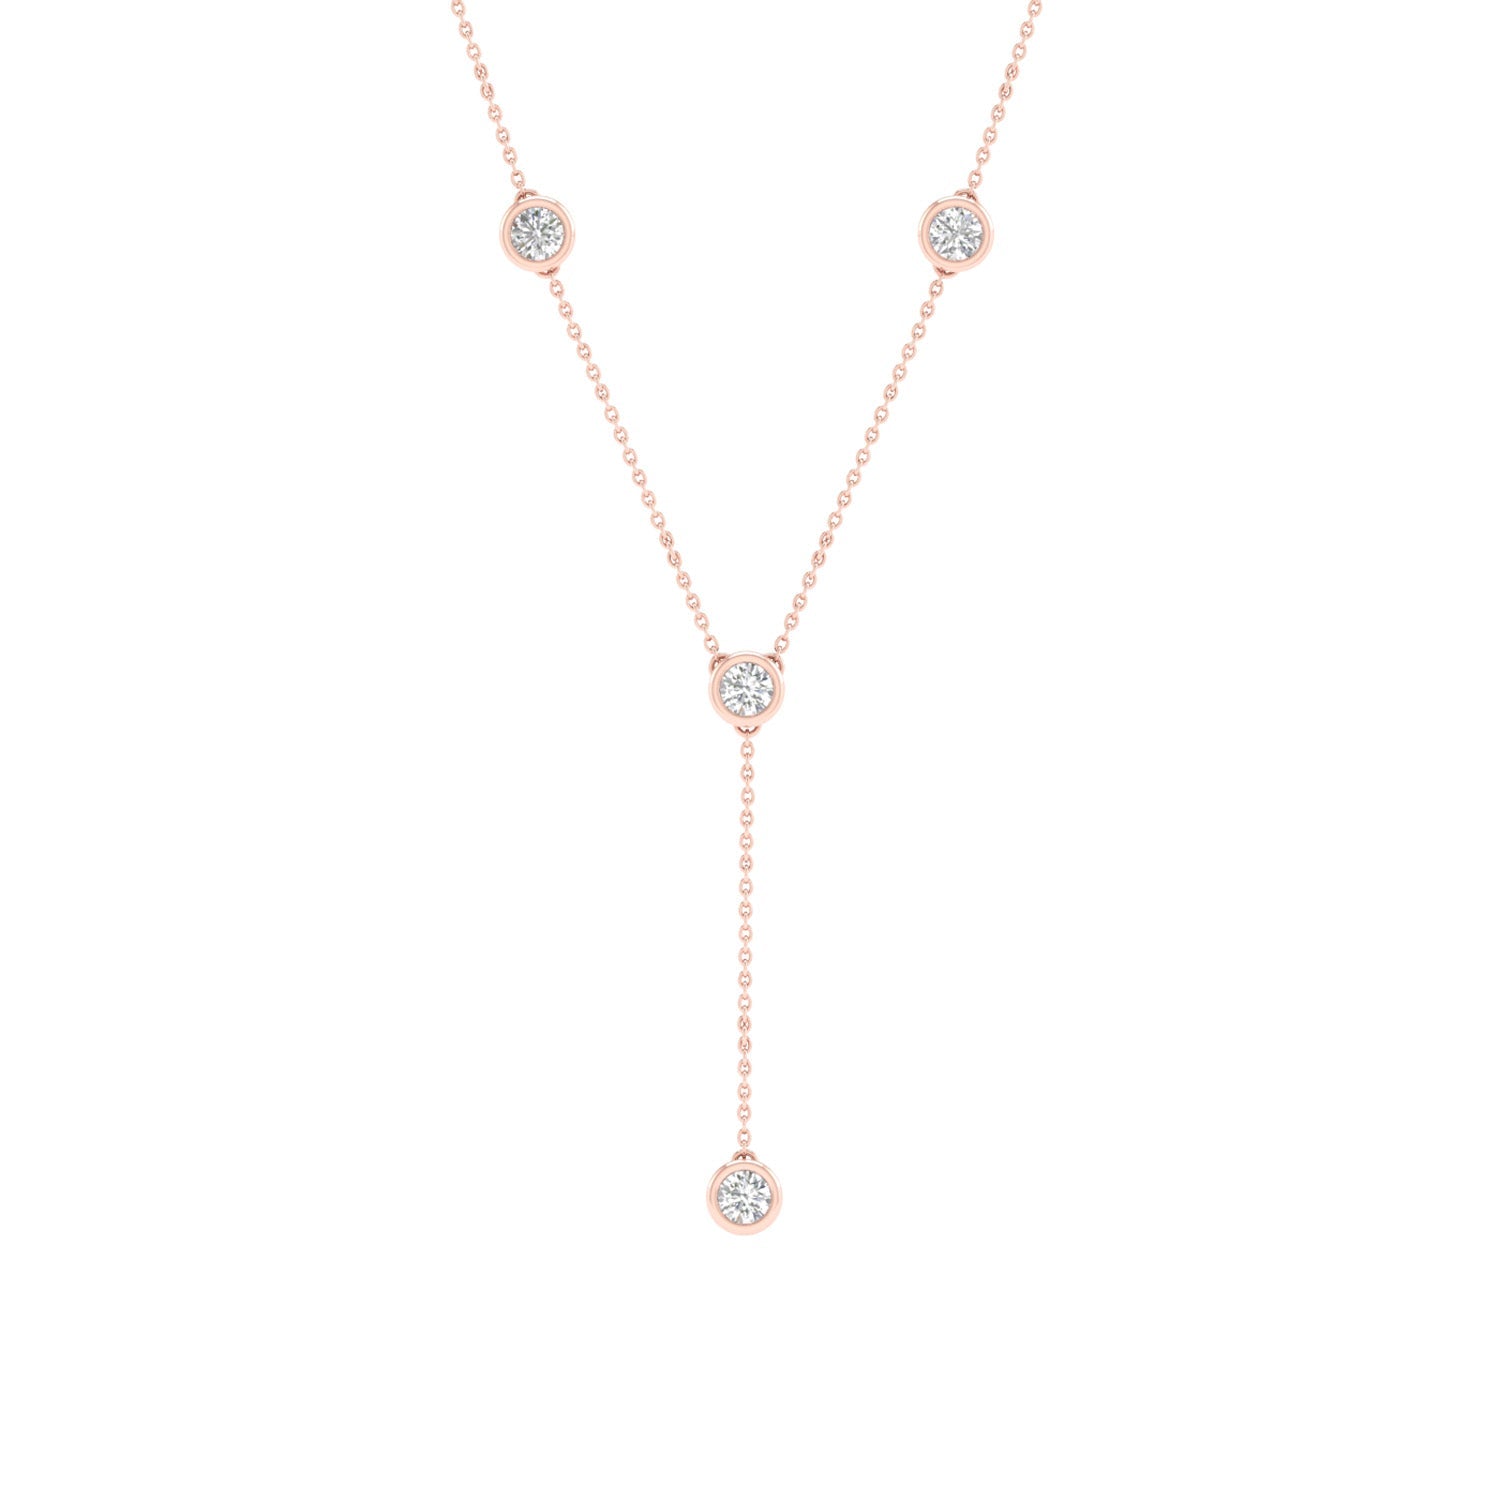 Encompassing Round Stationed Y Necklace_Product angle_1/4 Ct. - 1